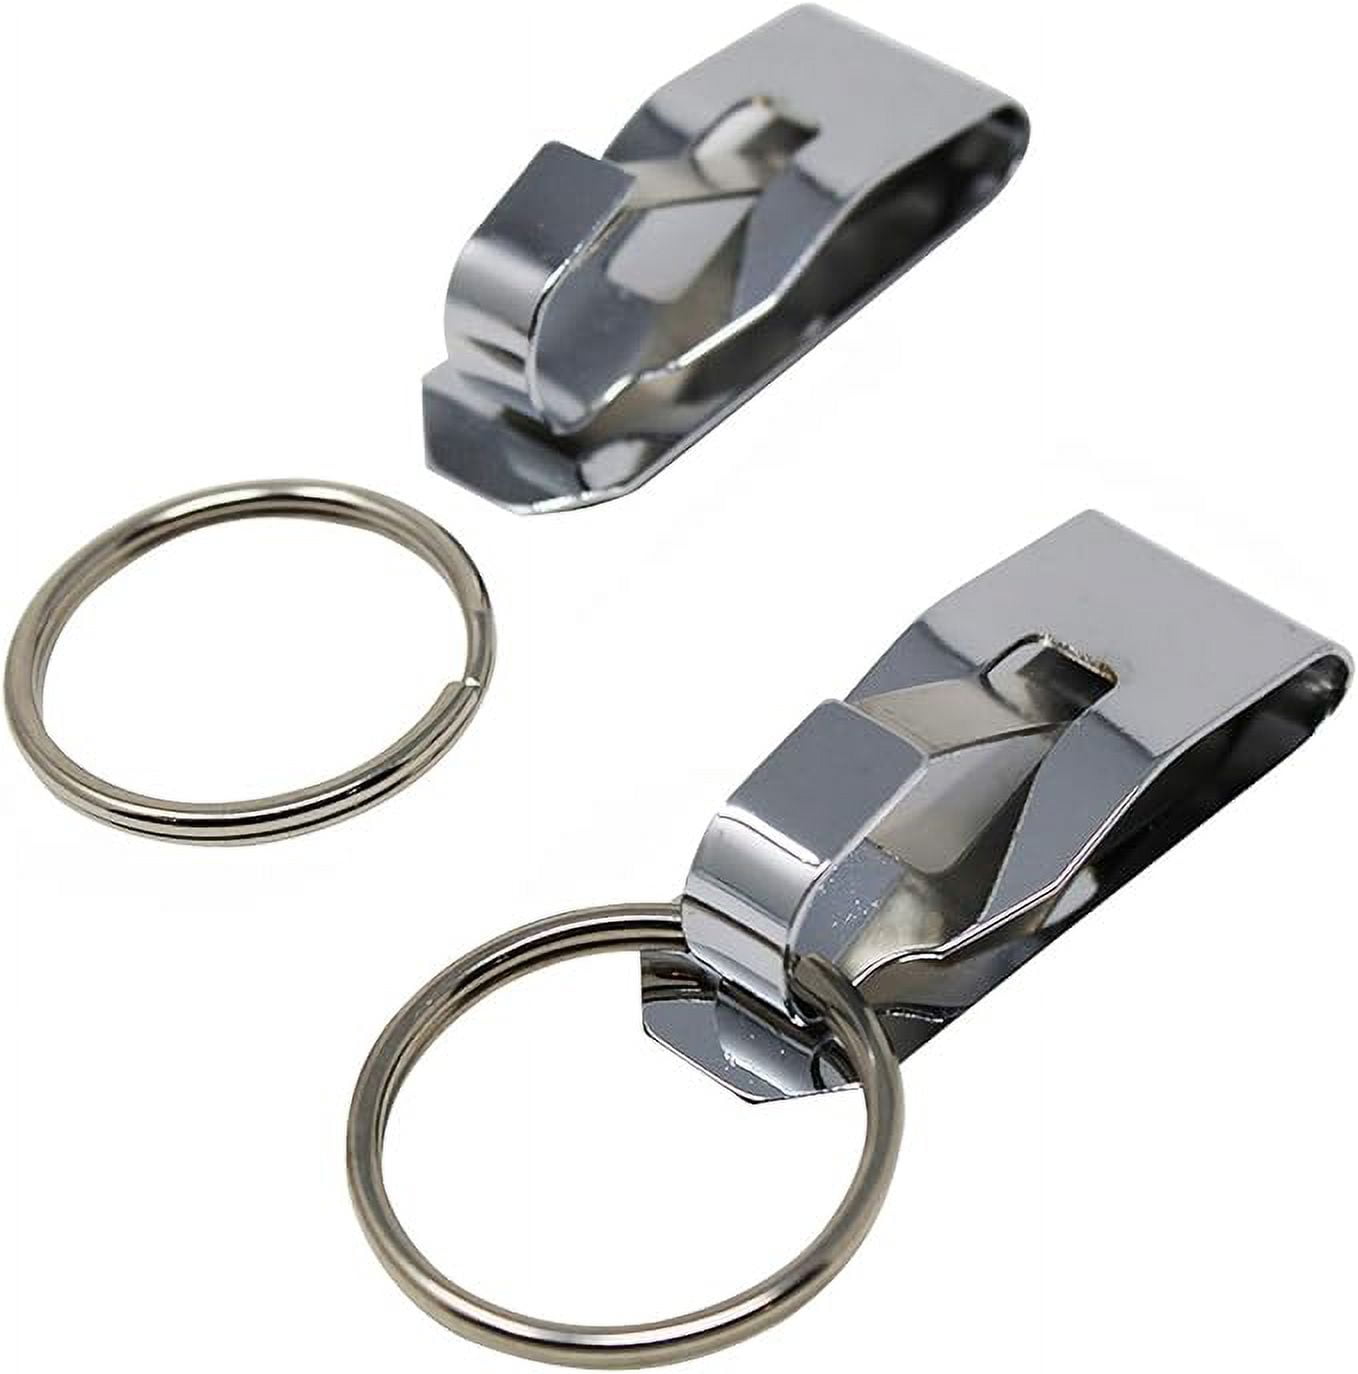 25 - Country Brook Design® 1 inch Wristlet Key Chain Fob Hardware 